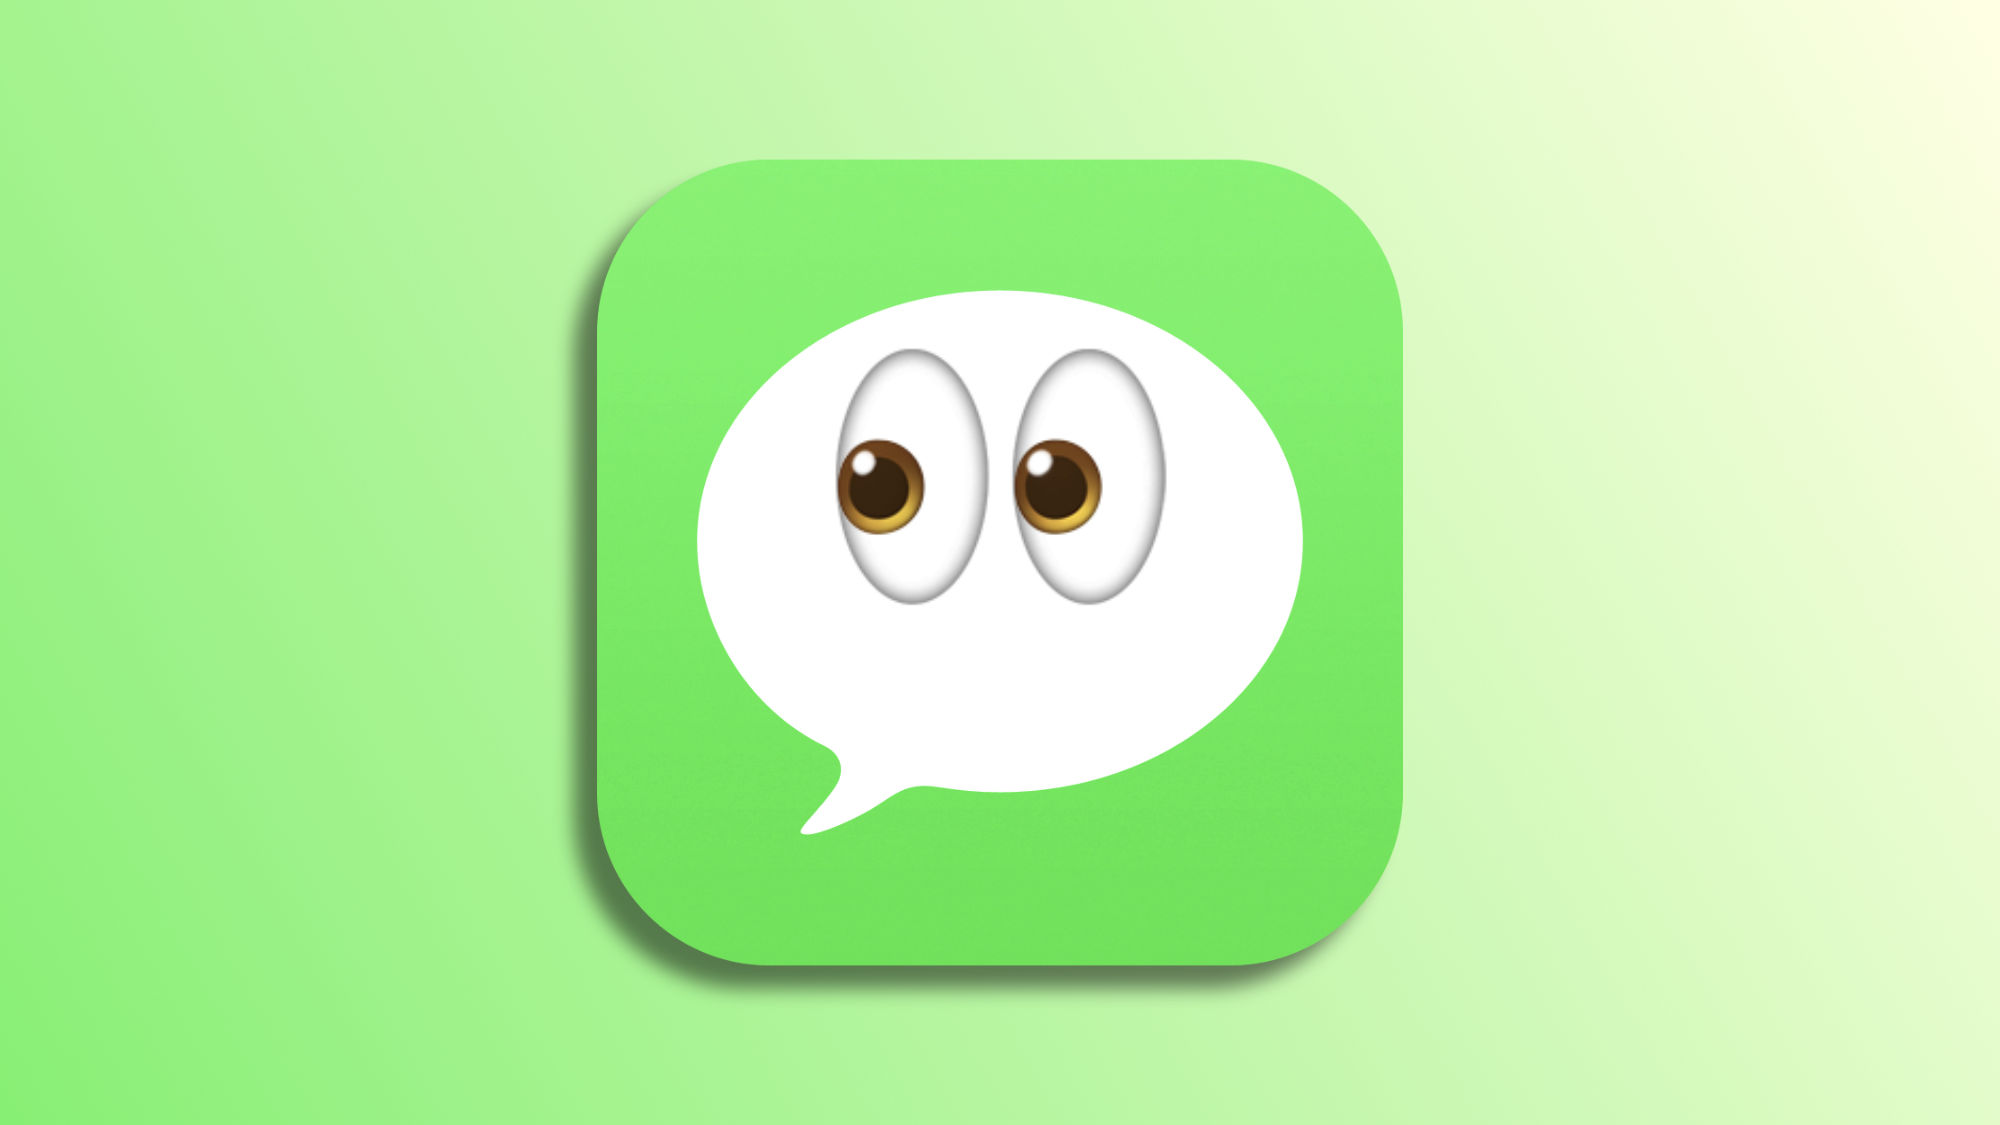 Make sure no one reads your conversations on the Messages app with this simple setting for the iPhone, iPad, or Mac